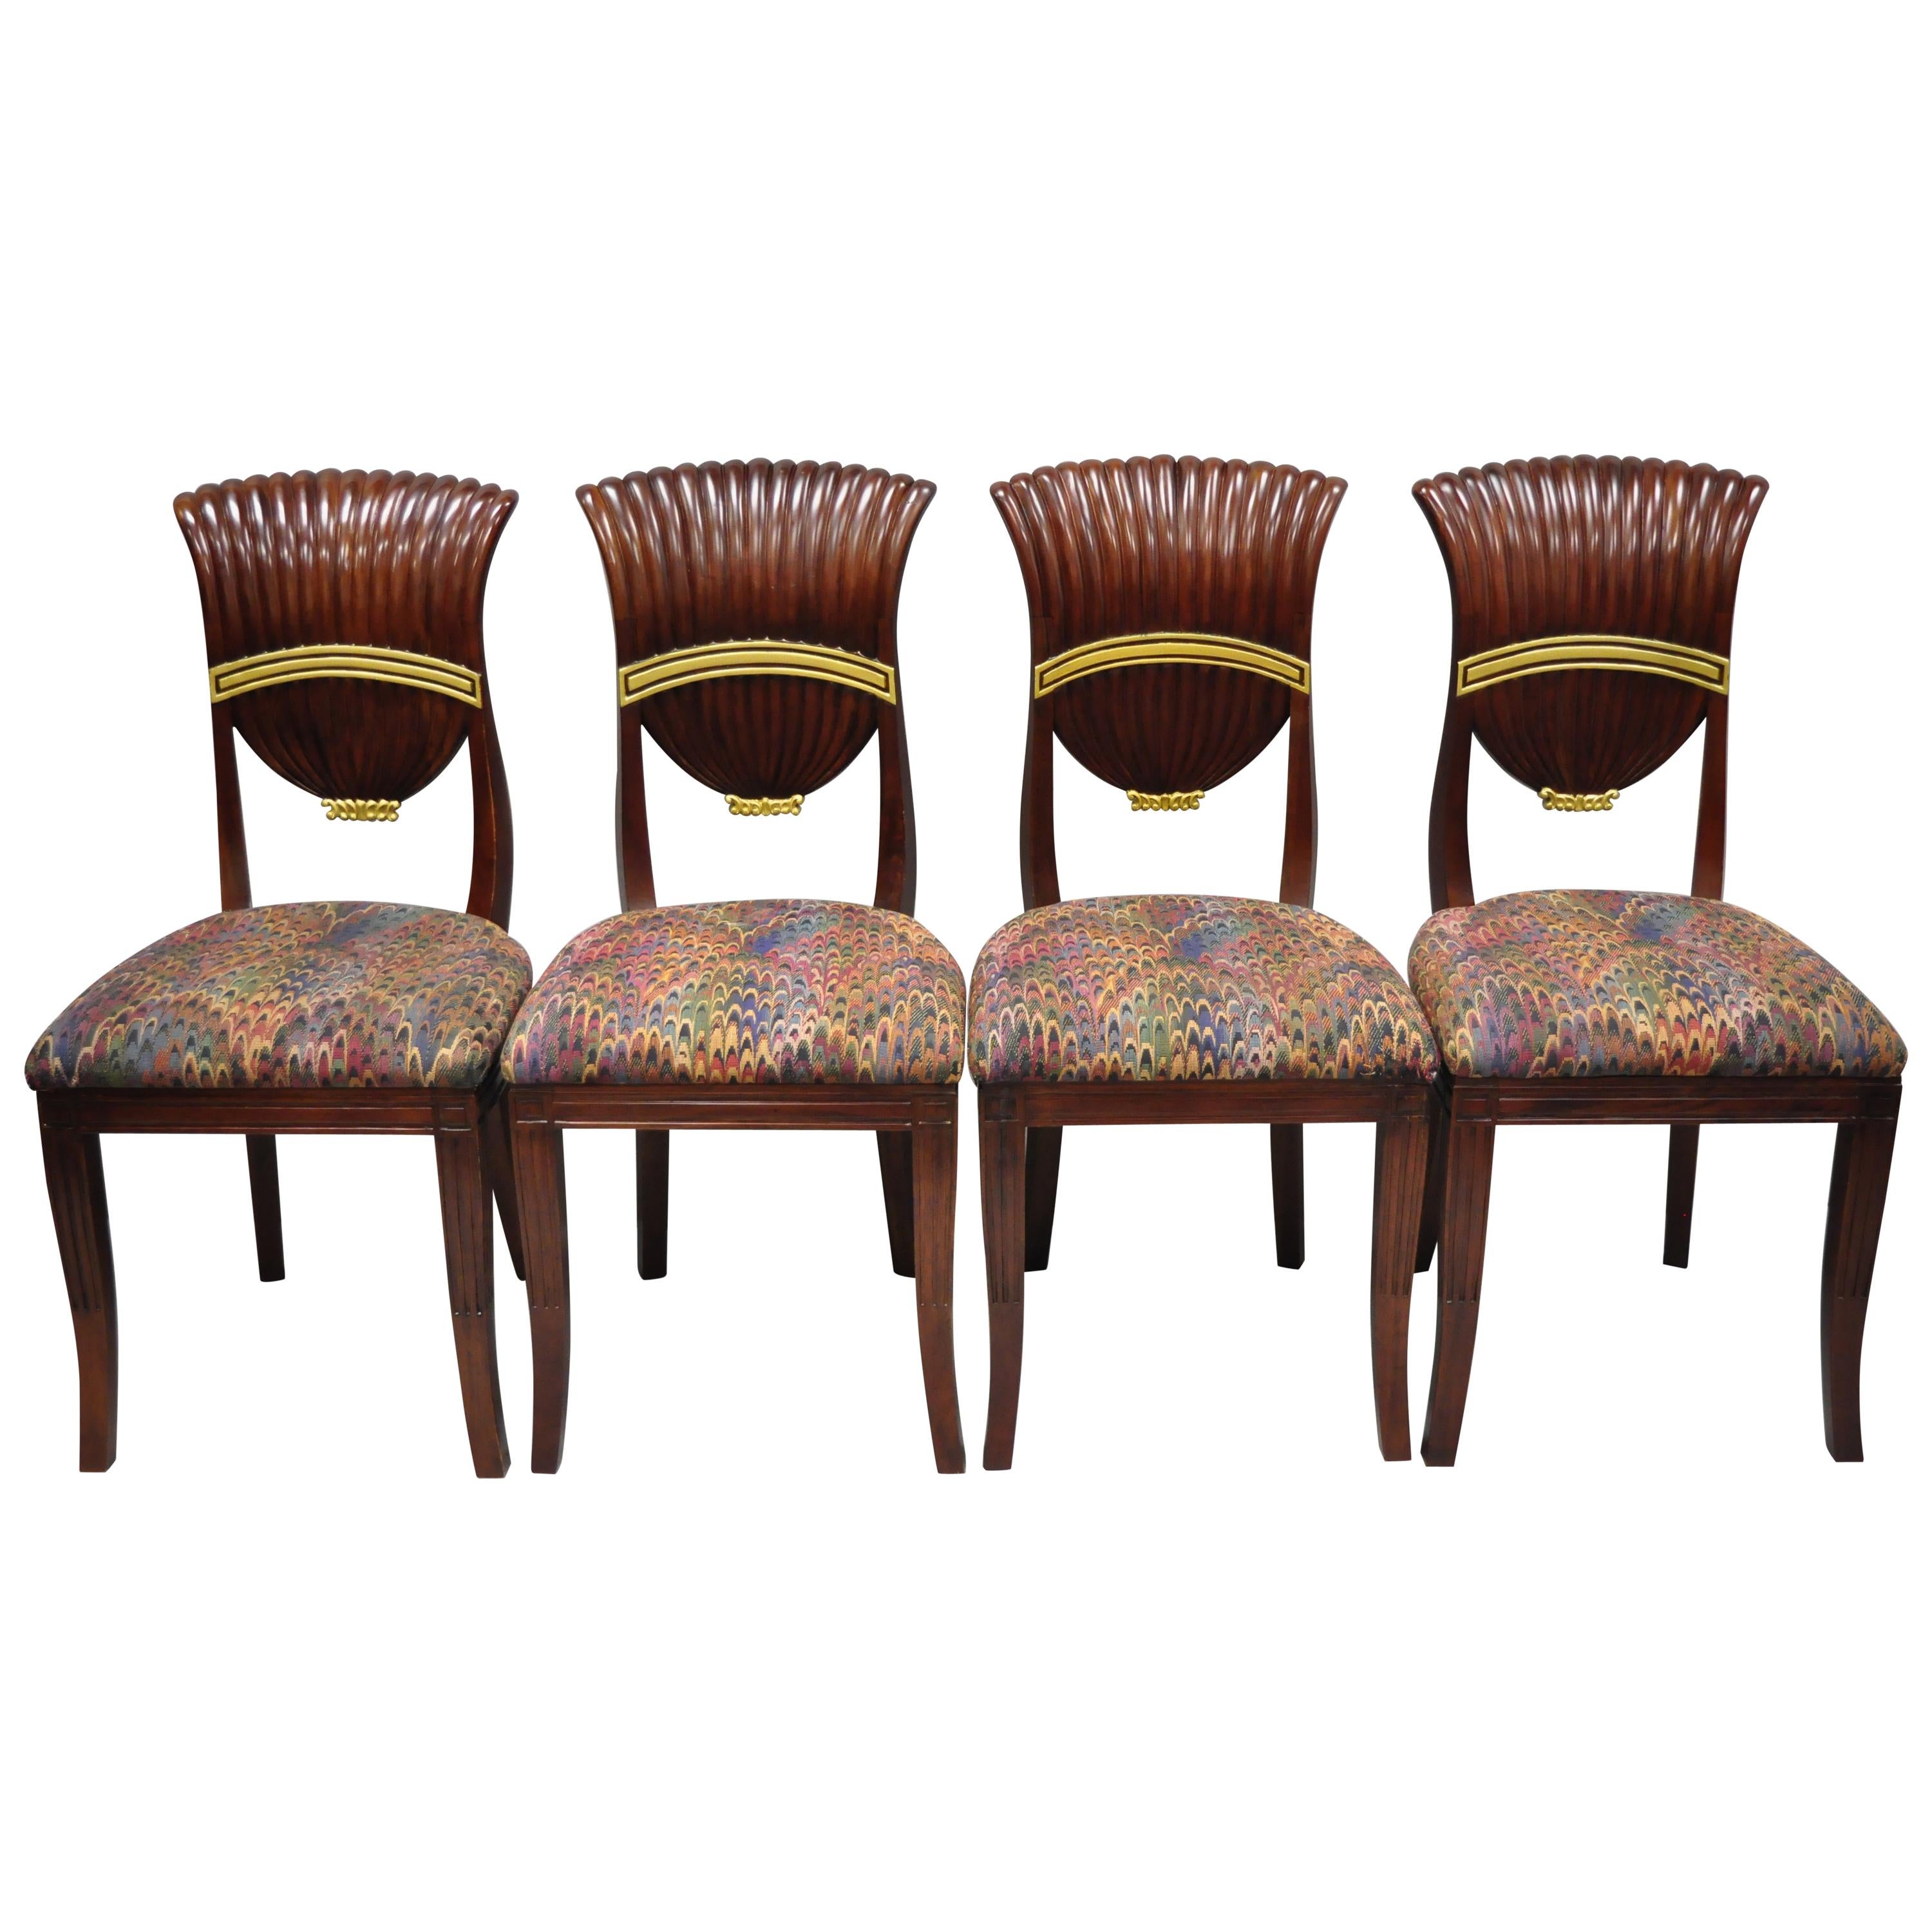 Set of Four French Neoclassical Style Mahogany Shell Fan Back Dining Room Chairs